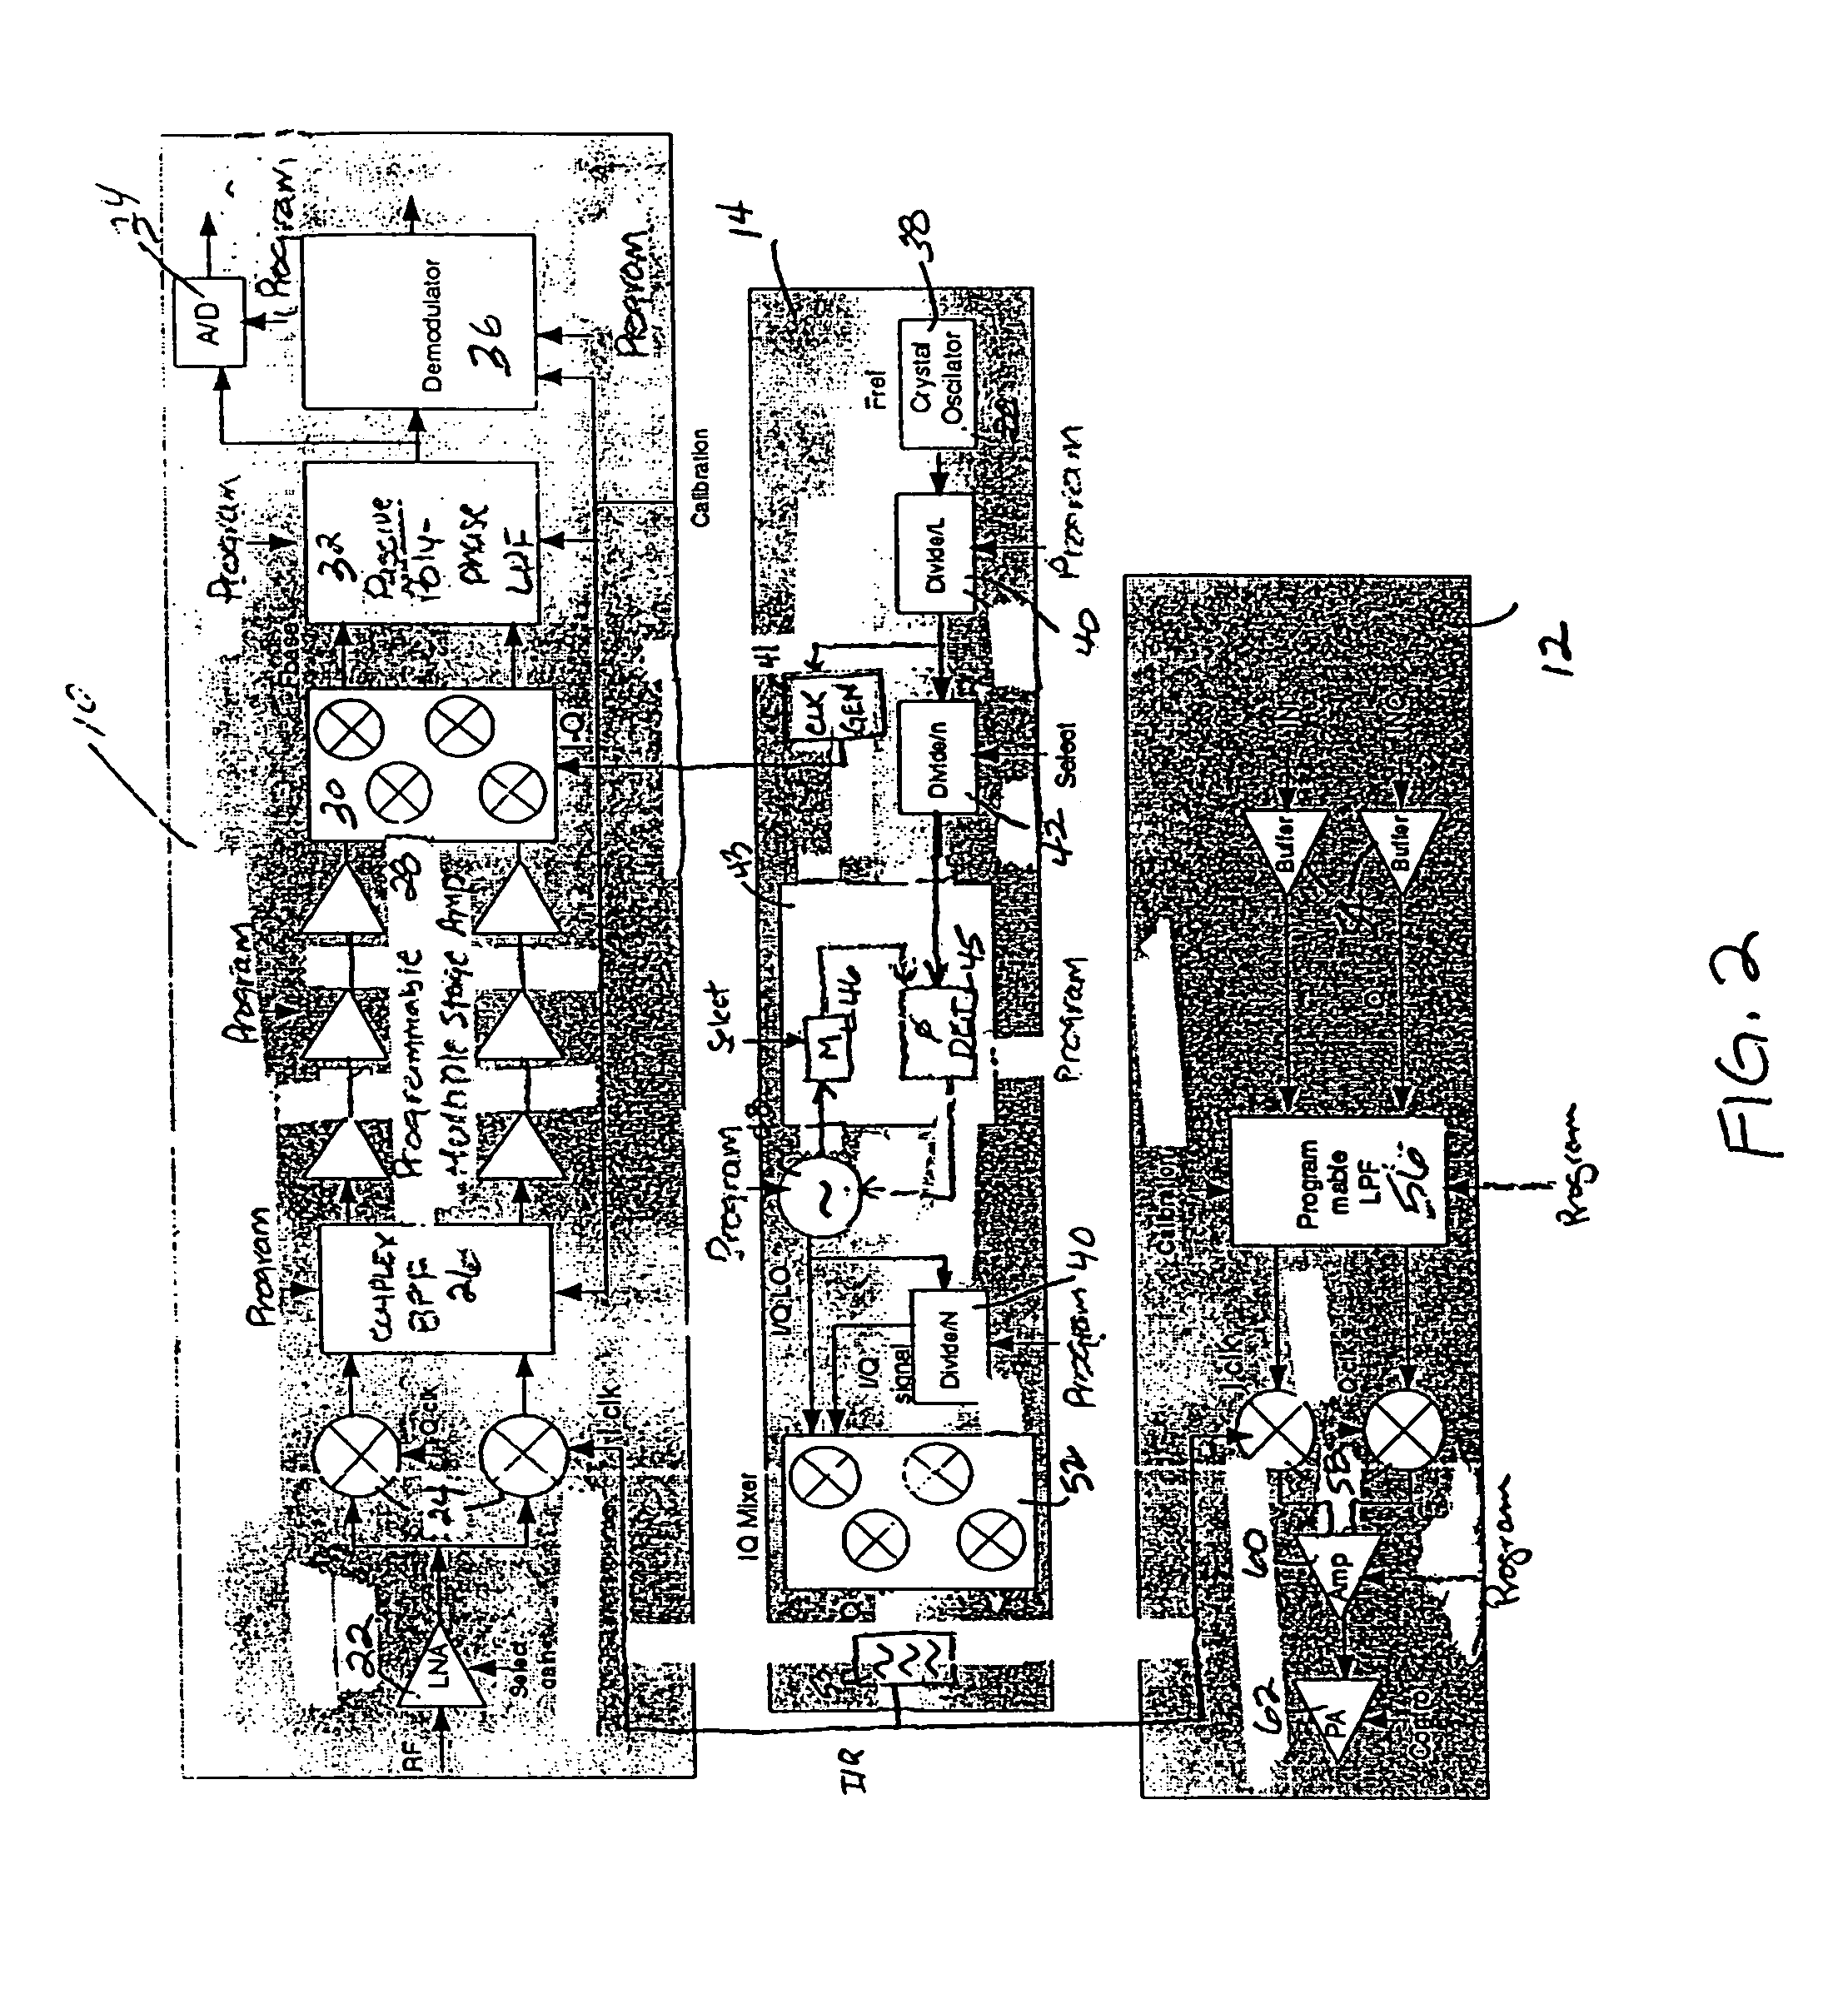 Adaptive radio transceiver with noise suppression